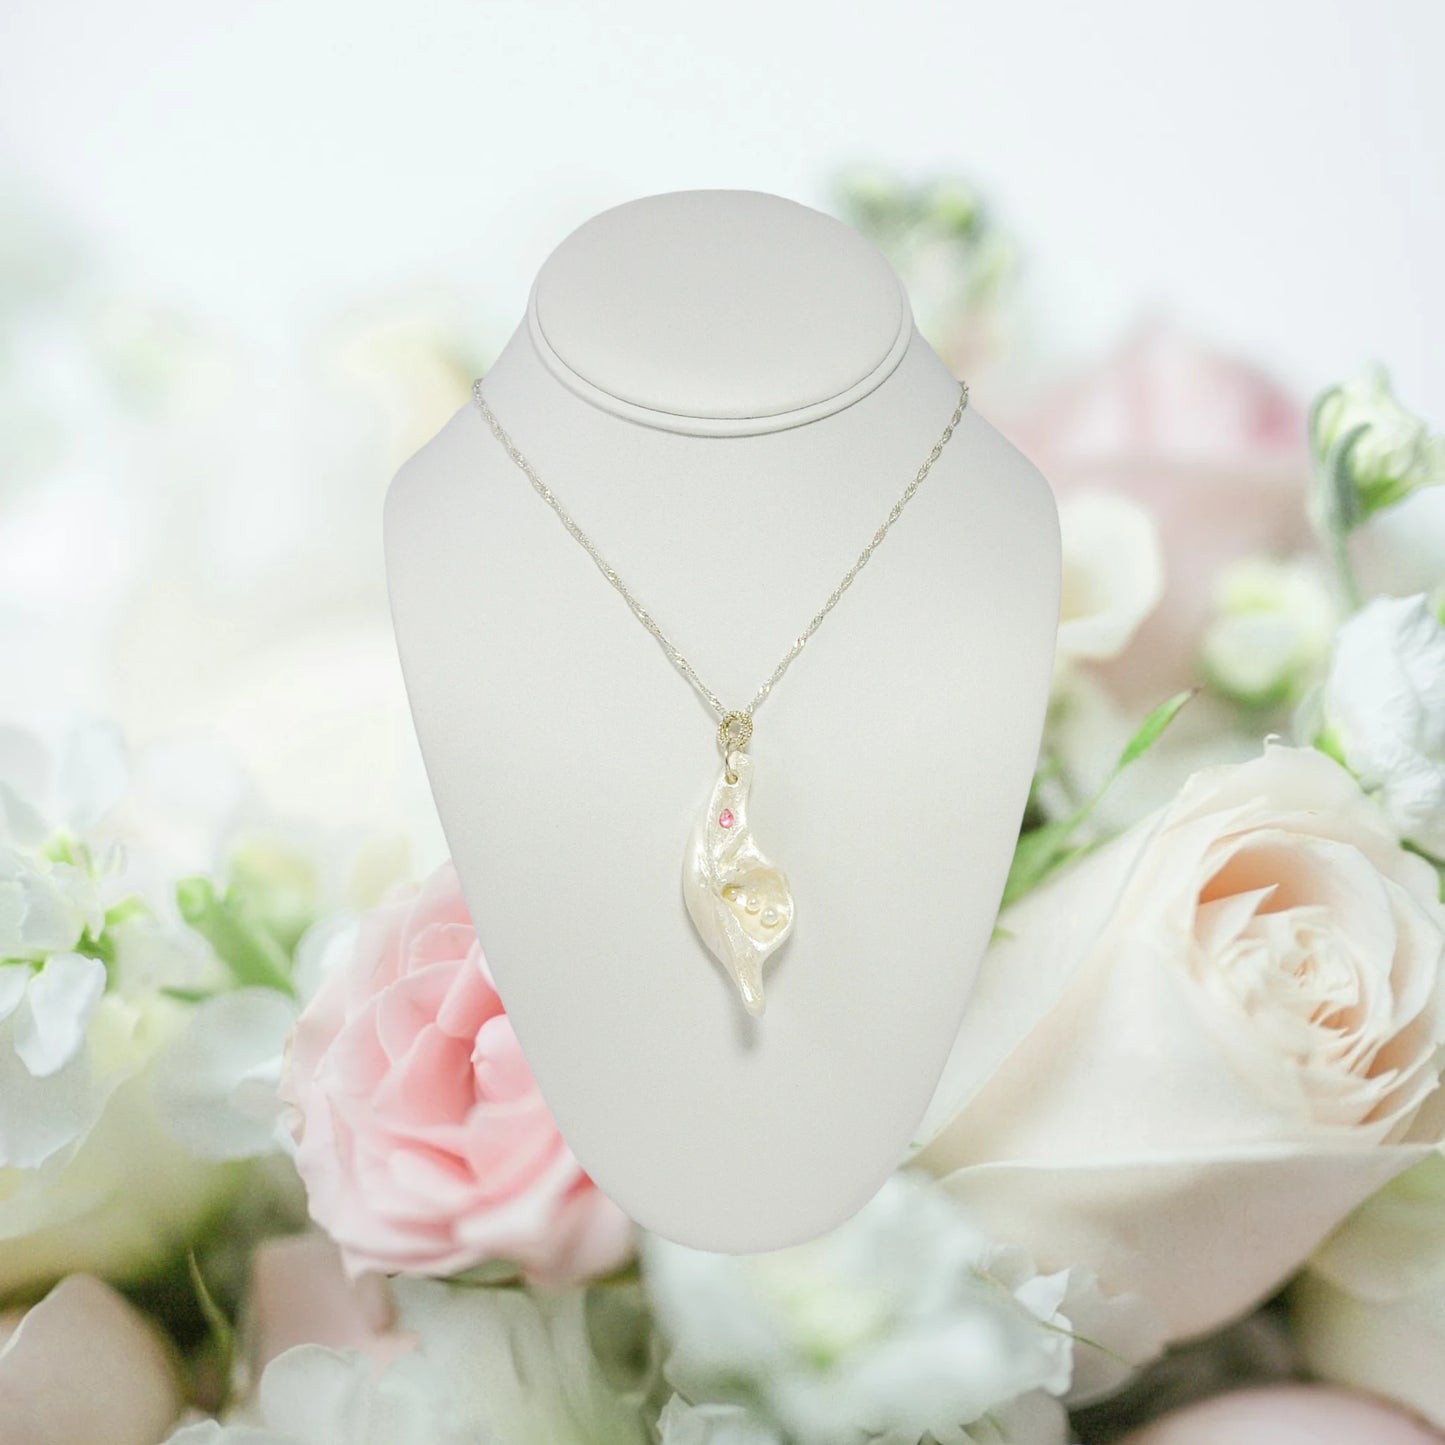 A trio of white baby freshwater pearls and a teardrop rose cut pink tourmaline gemstone compliments the seashell pendant beautifully. The pendant is shown hanging on a necklace over a white displayer with pink and white roses in the background.